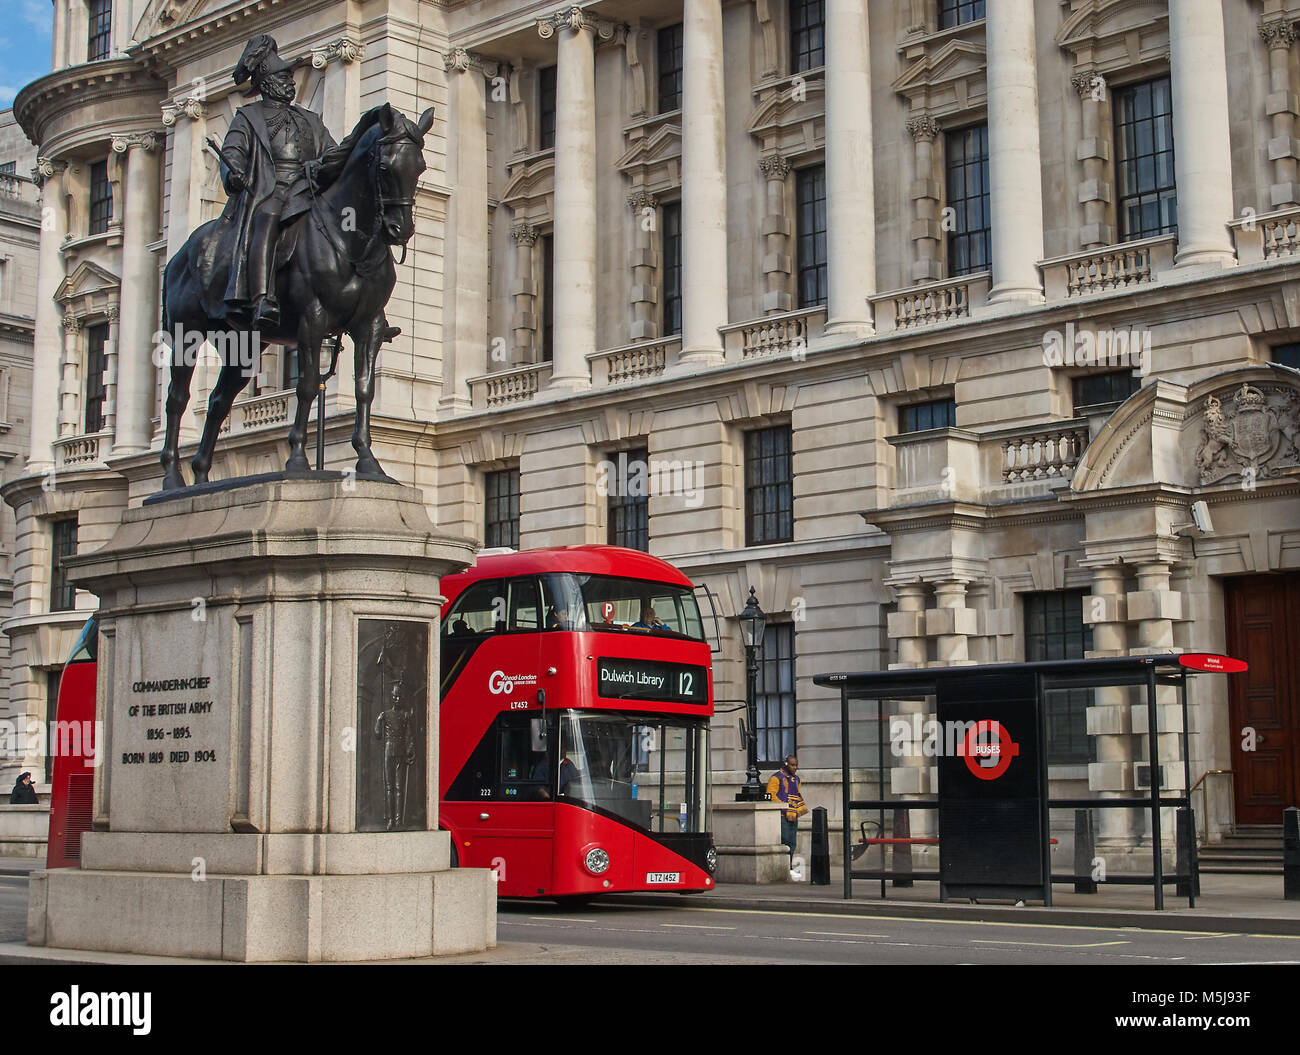 A red double deck bus on Whitehall, London Stock Photo